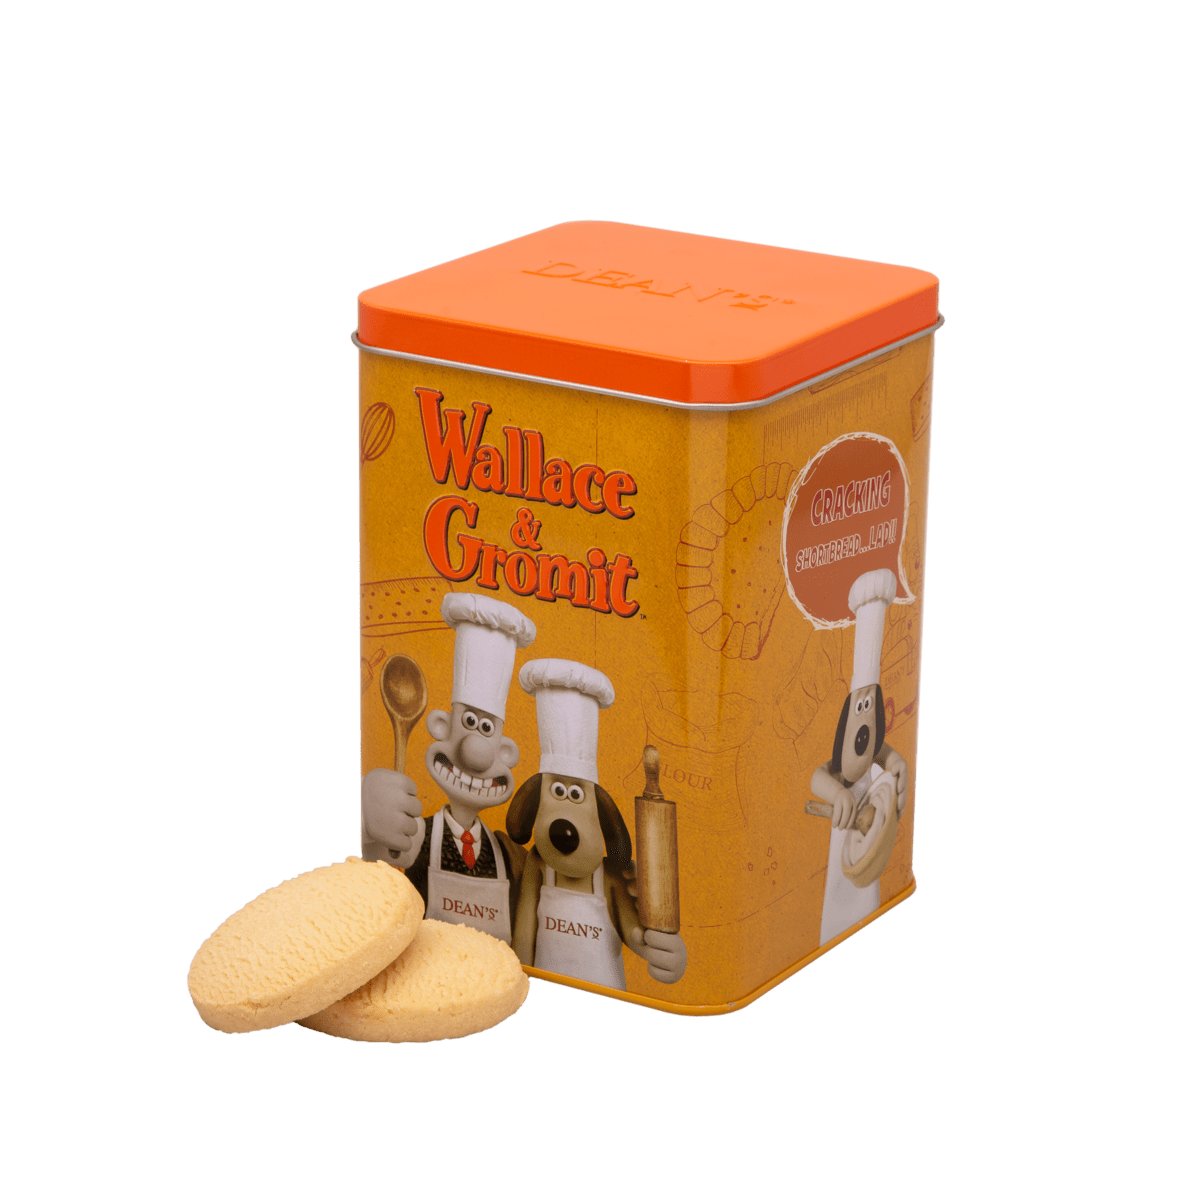 Wallace & Gromit "Cracking Shortbread" All Butter Shortbread Rounds 300g